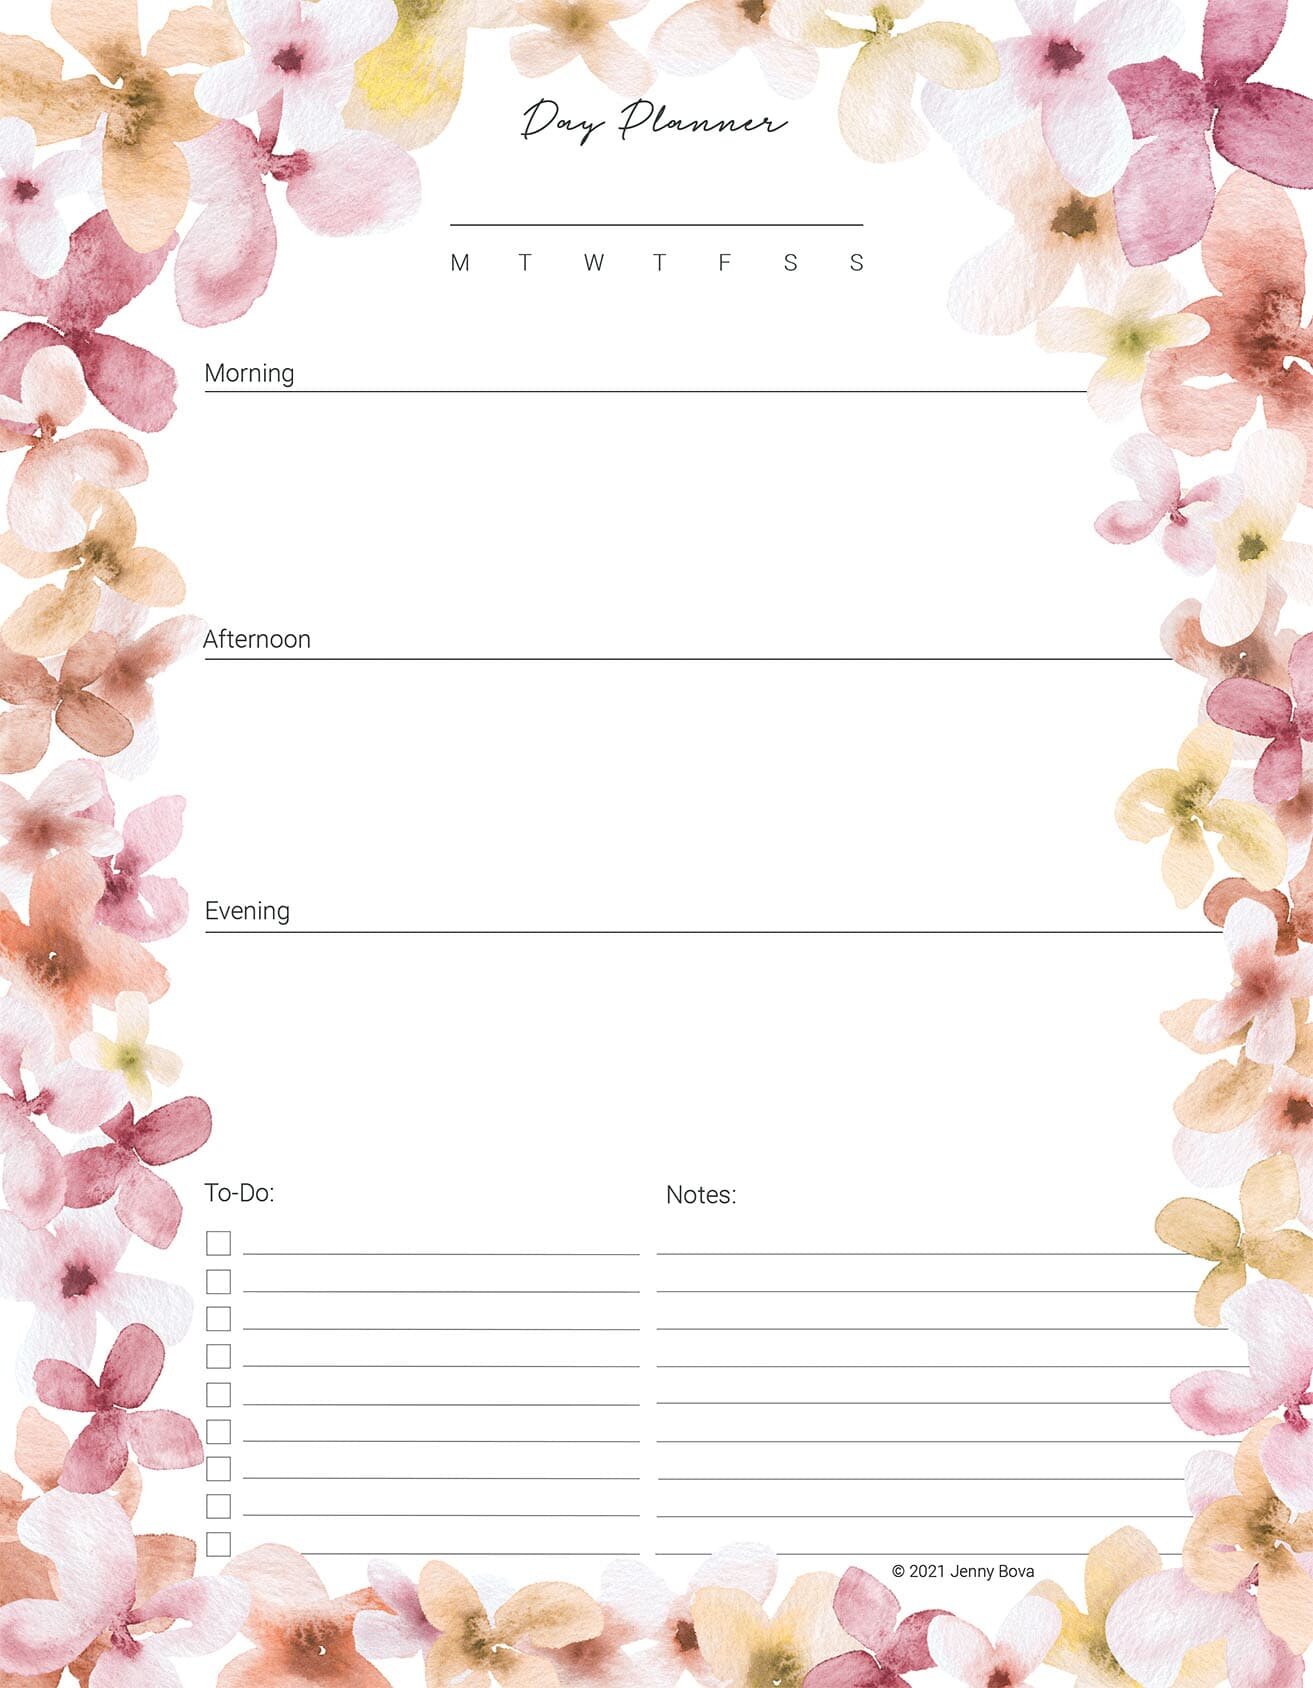 Jenny Bova Daily Printable Planning Page Pinks Optimized.jpg